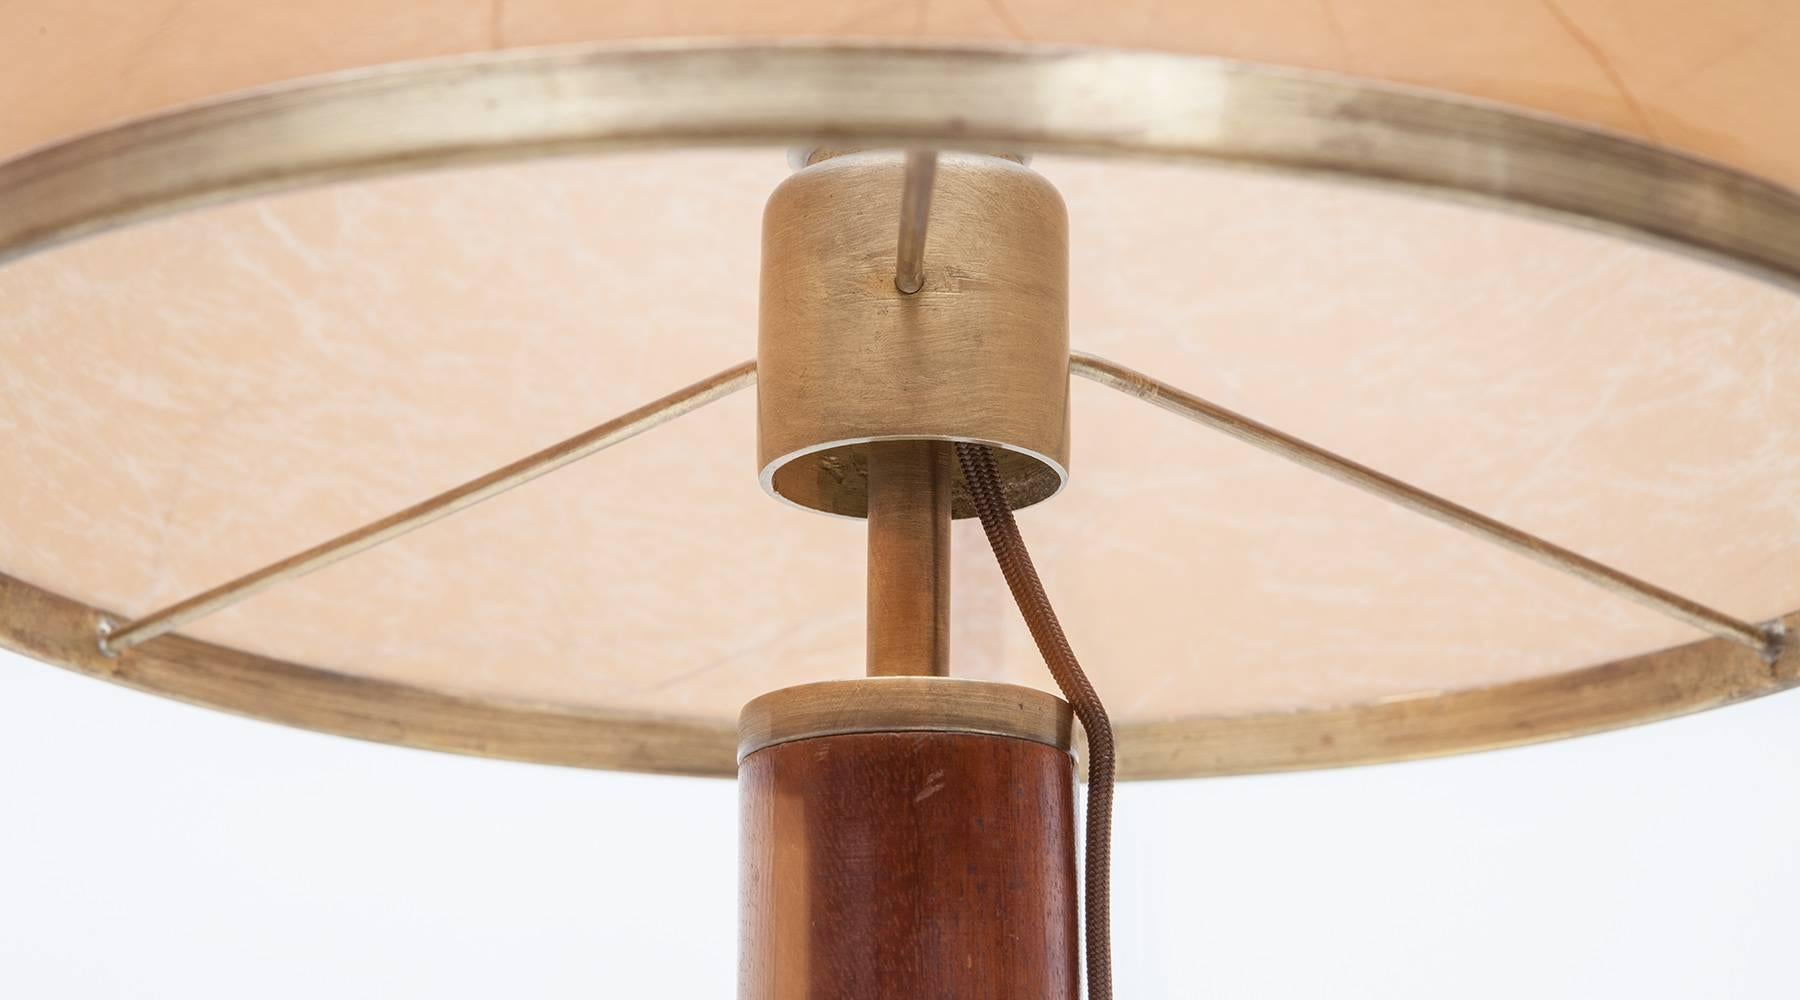 Portuguese European Midcentury-modern Table Lamp with wood and brass by Alvaro Siza